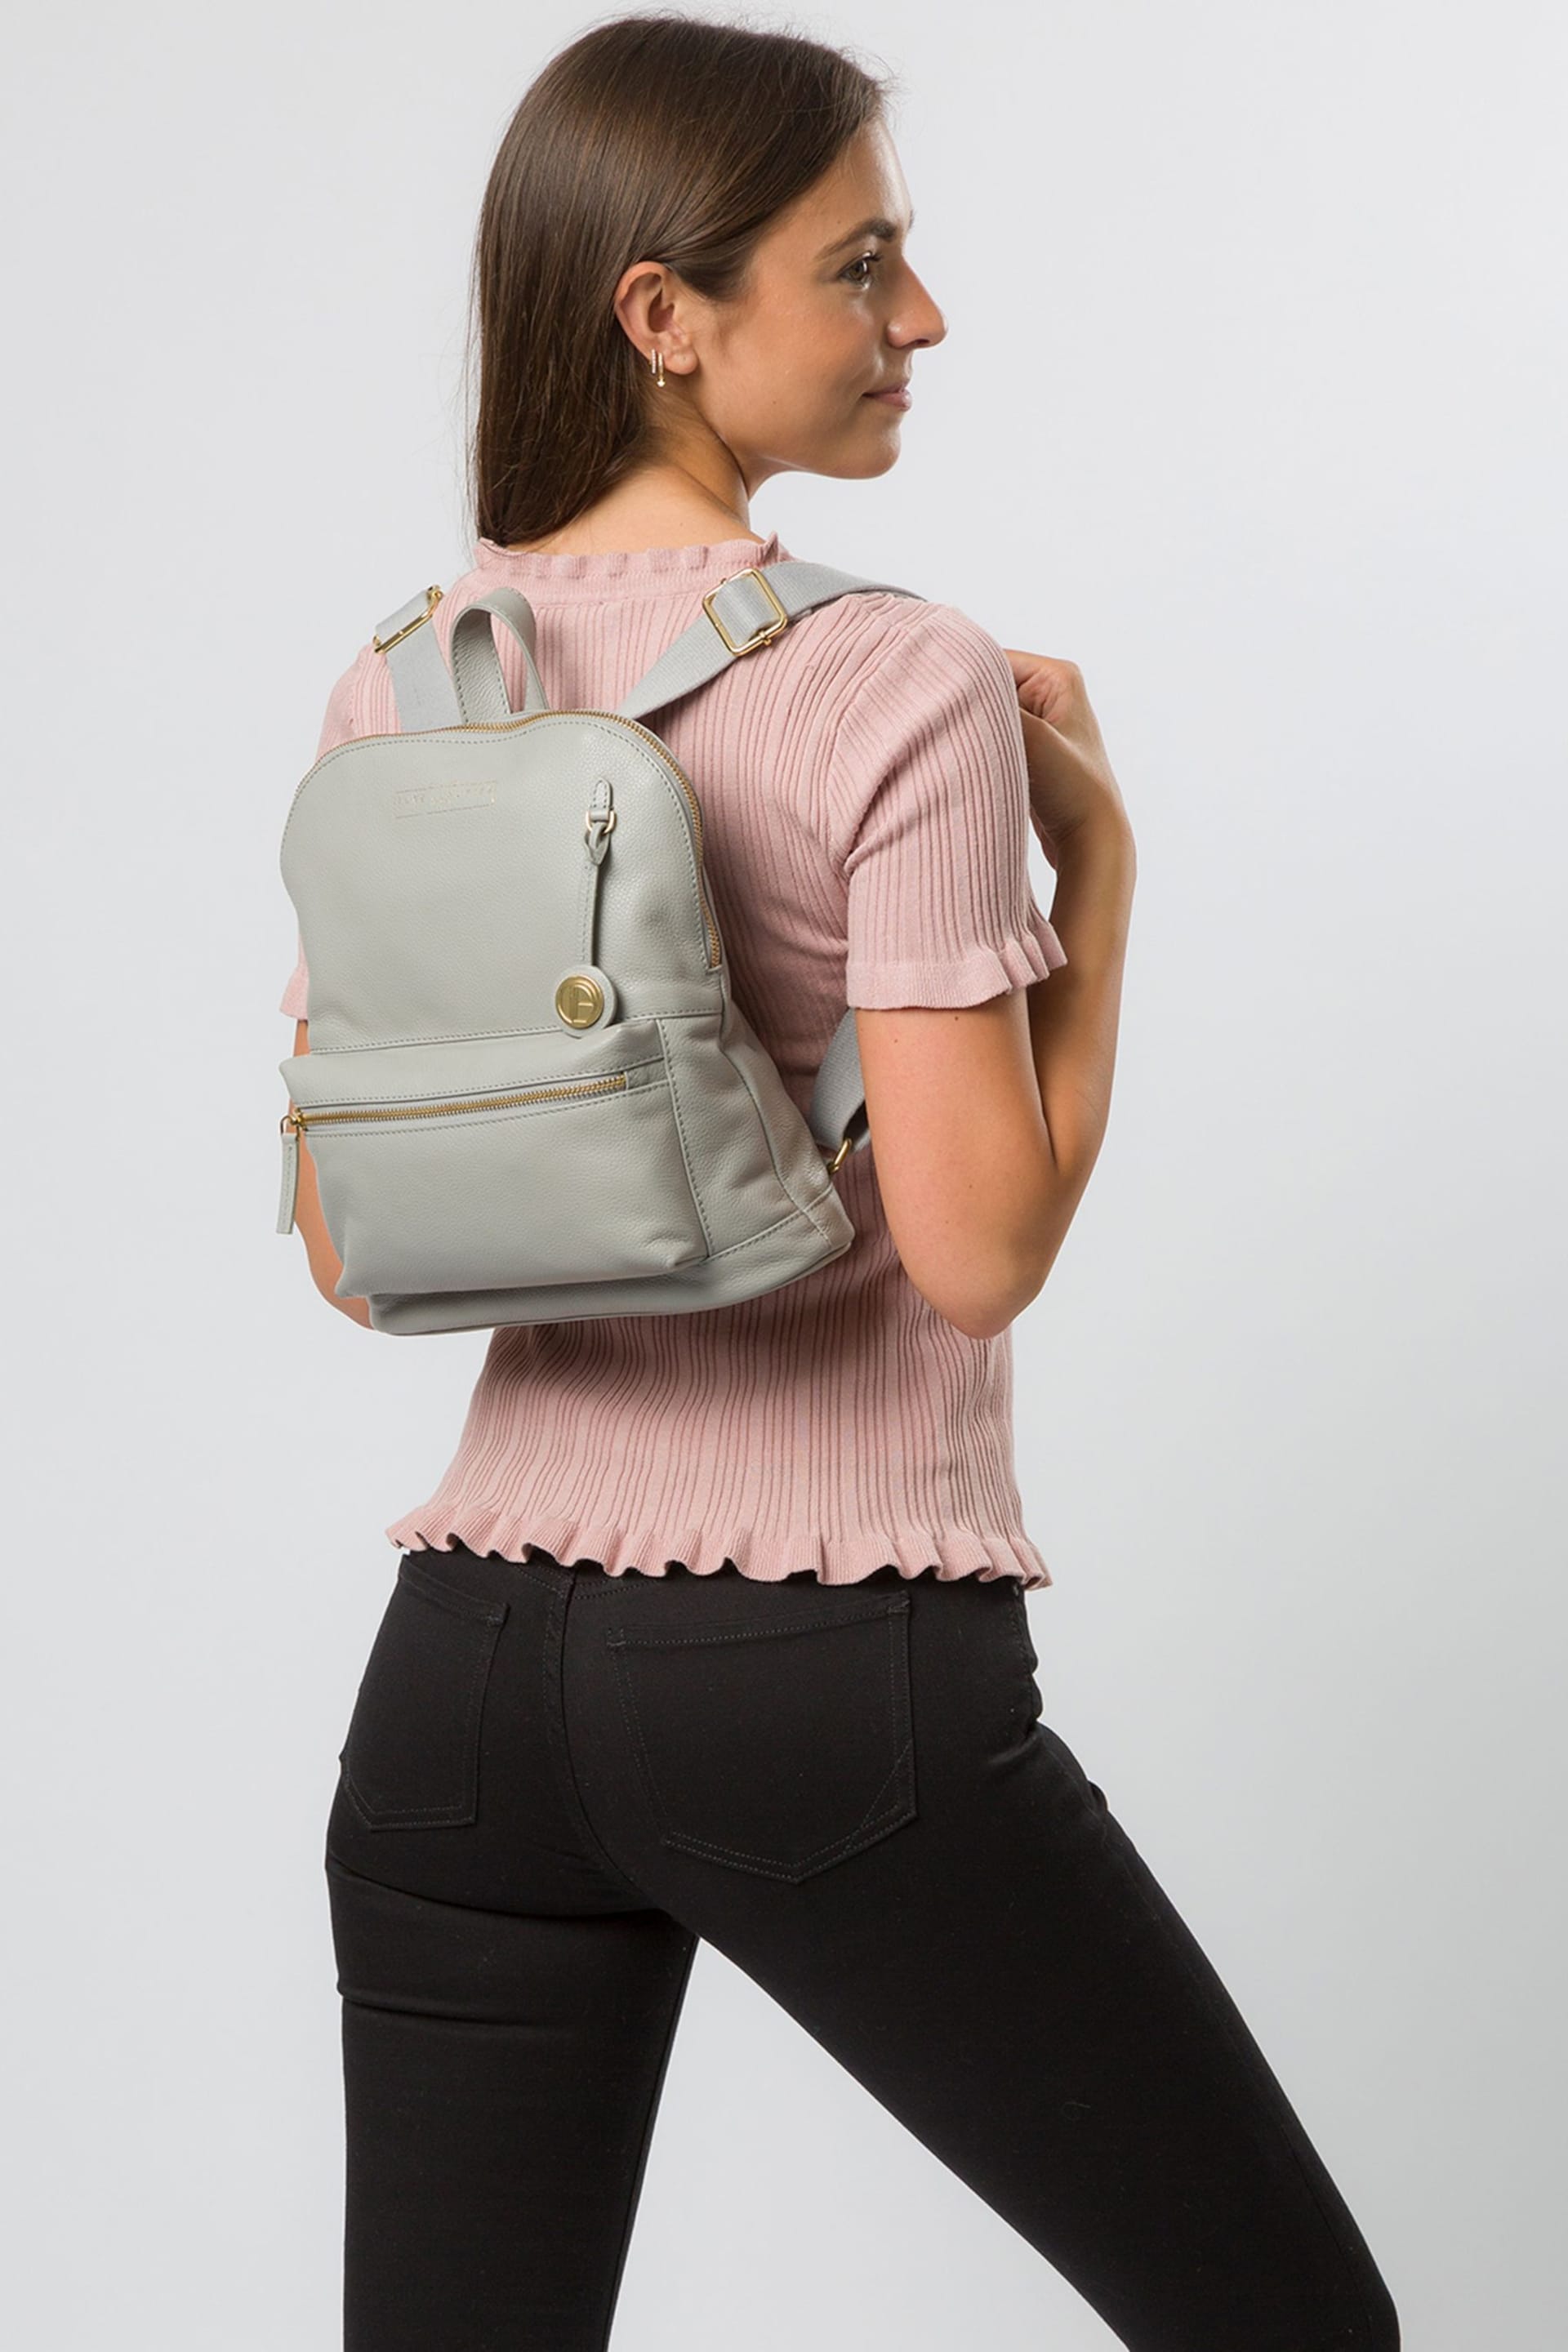 Pure Luxuries London Kinsely Leather Backpack - Image 1 of 5